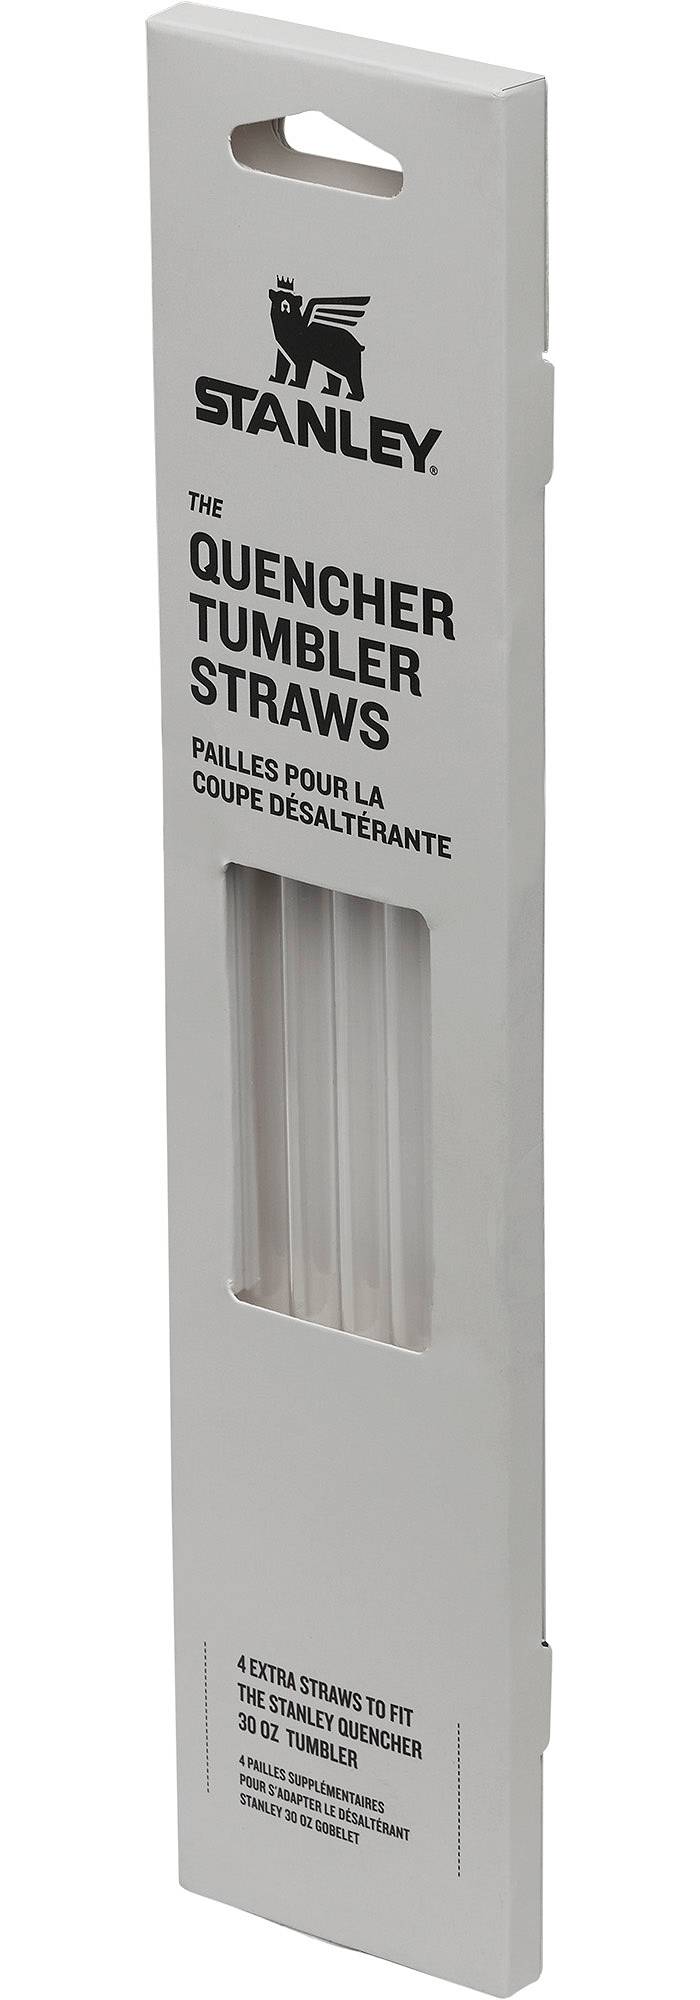 STANLEY Adventure Quencher 40 oz Tumbler 4 Pack Straws - CLEAR